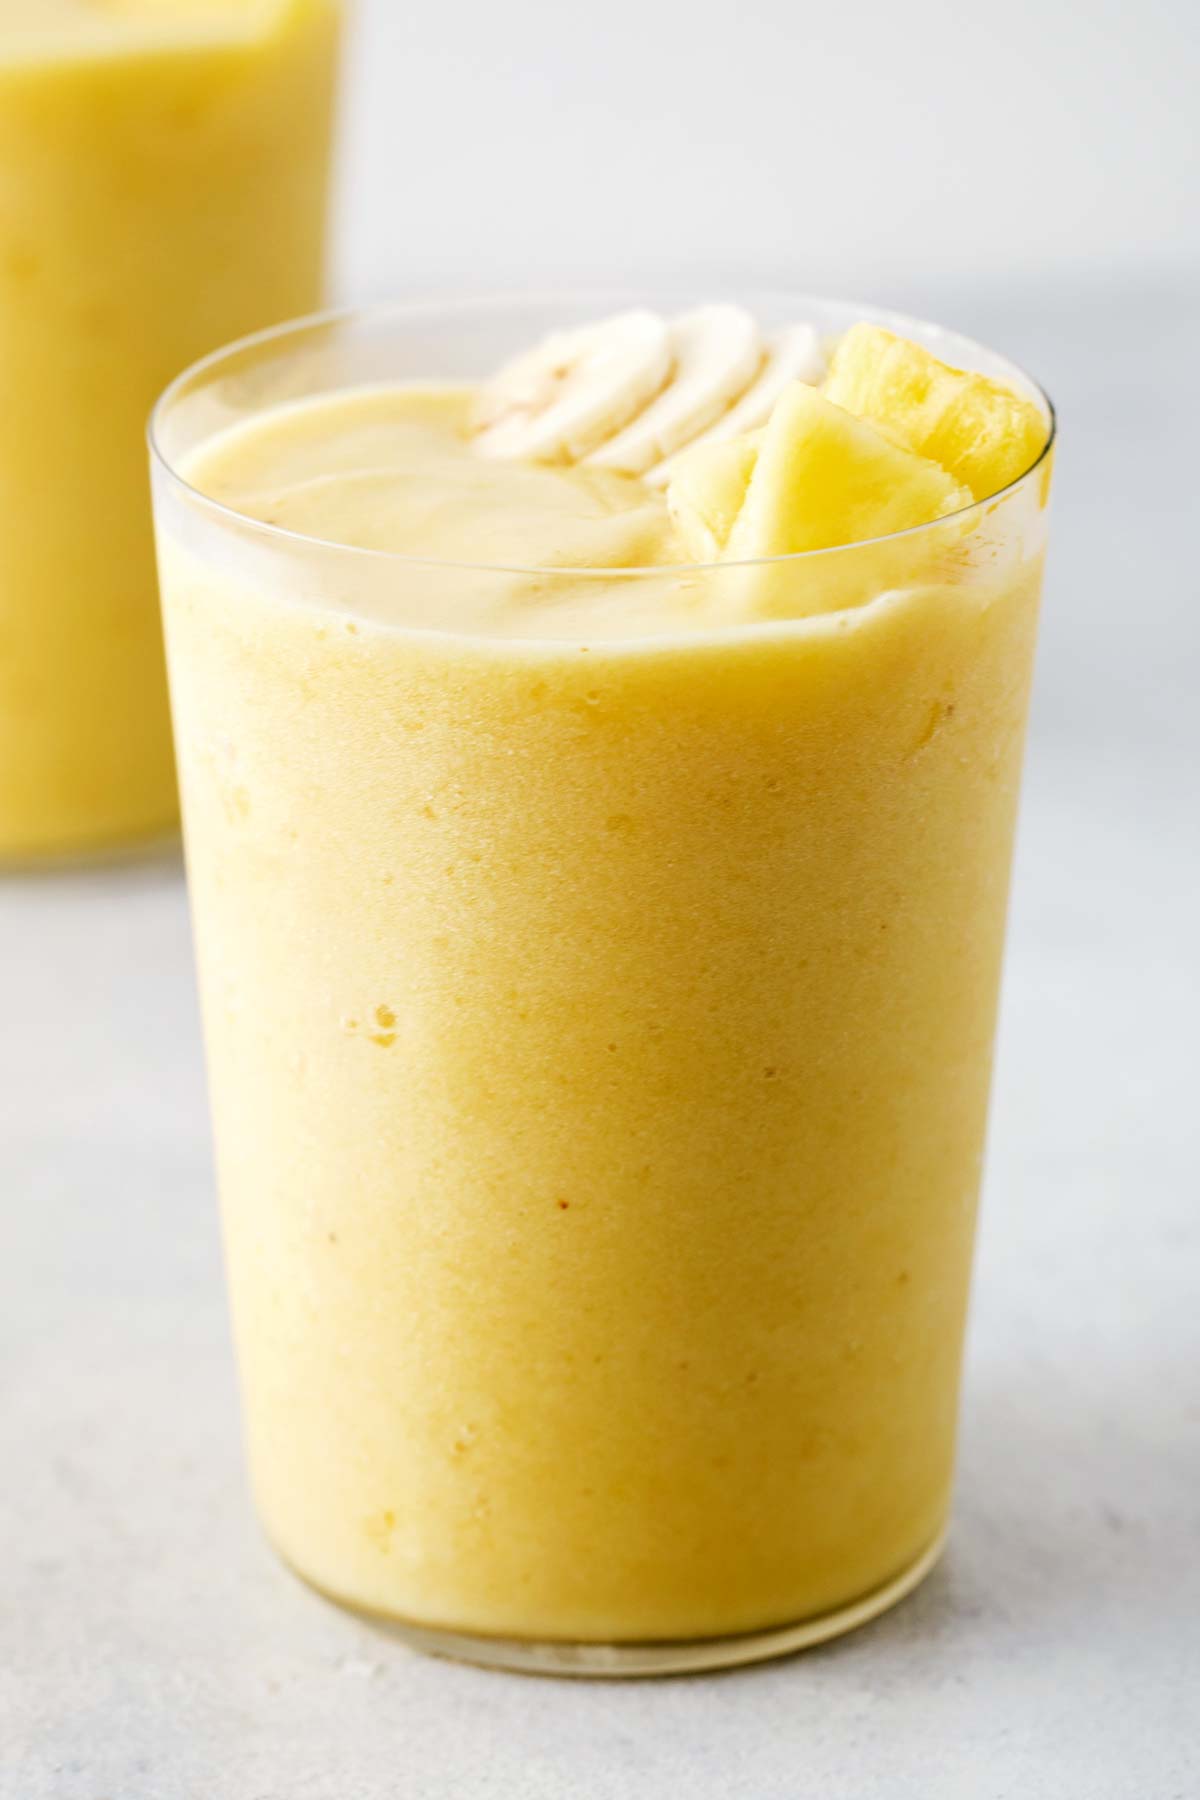 Pineapple smoothie in a glass.